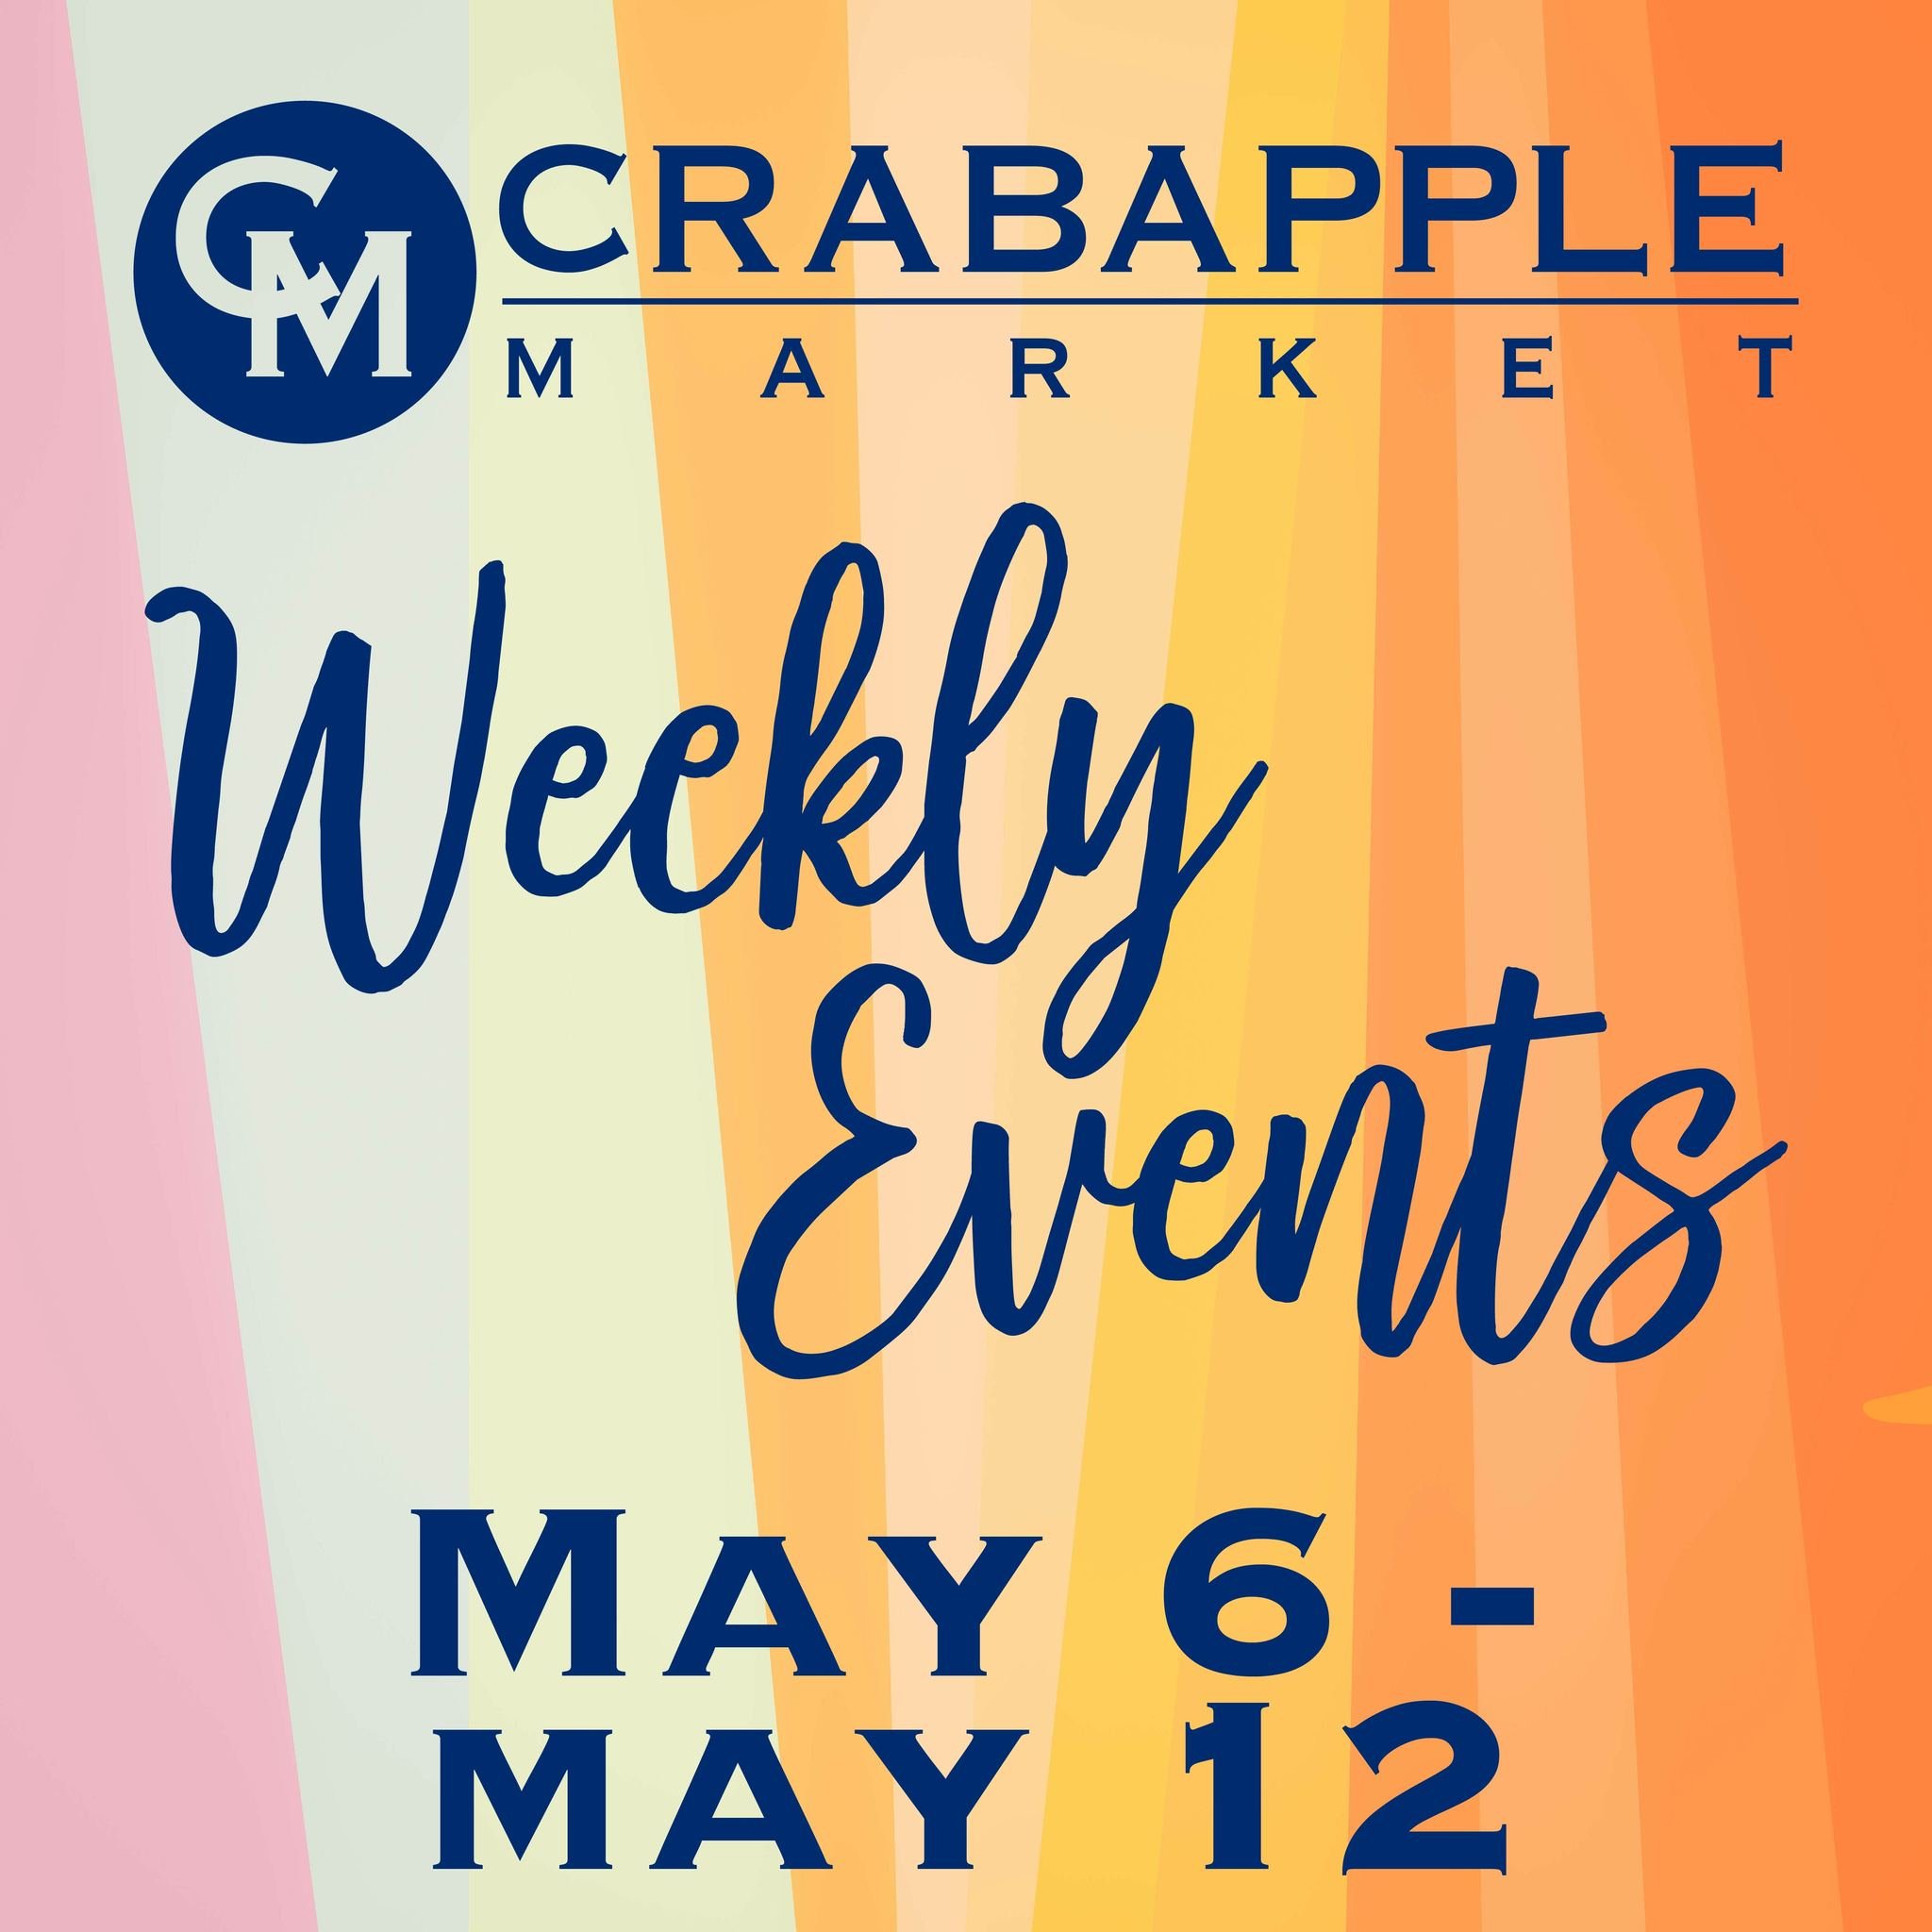 🌸May is in full bloom at Crabapple Market! Who else is excited for the first Grace on The Green Friday night with Kevin Swan and The Well Collective? Check out the full line up for this week.🌼